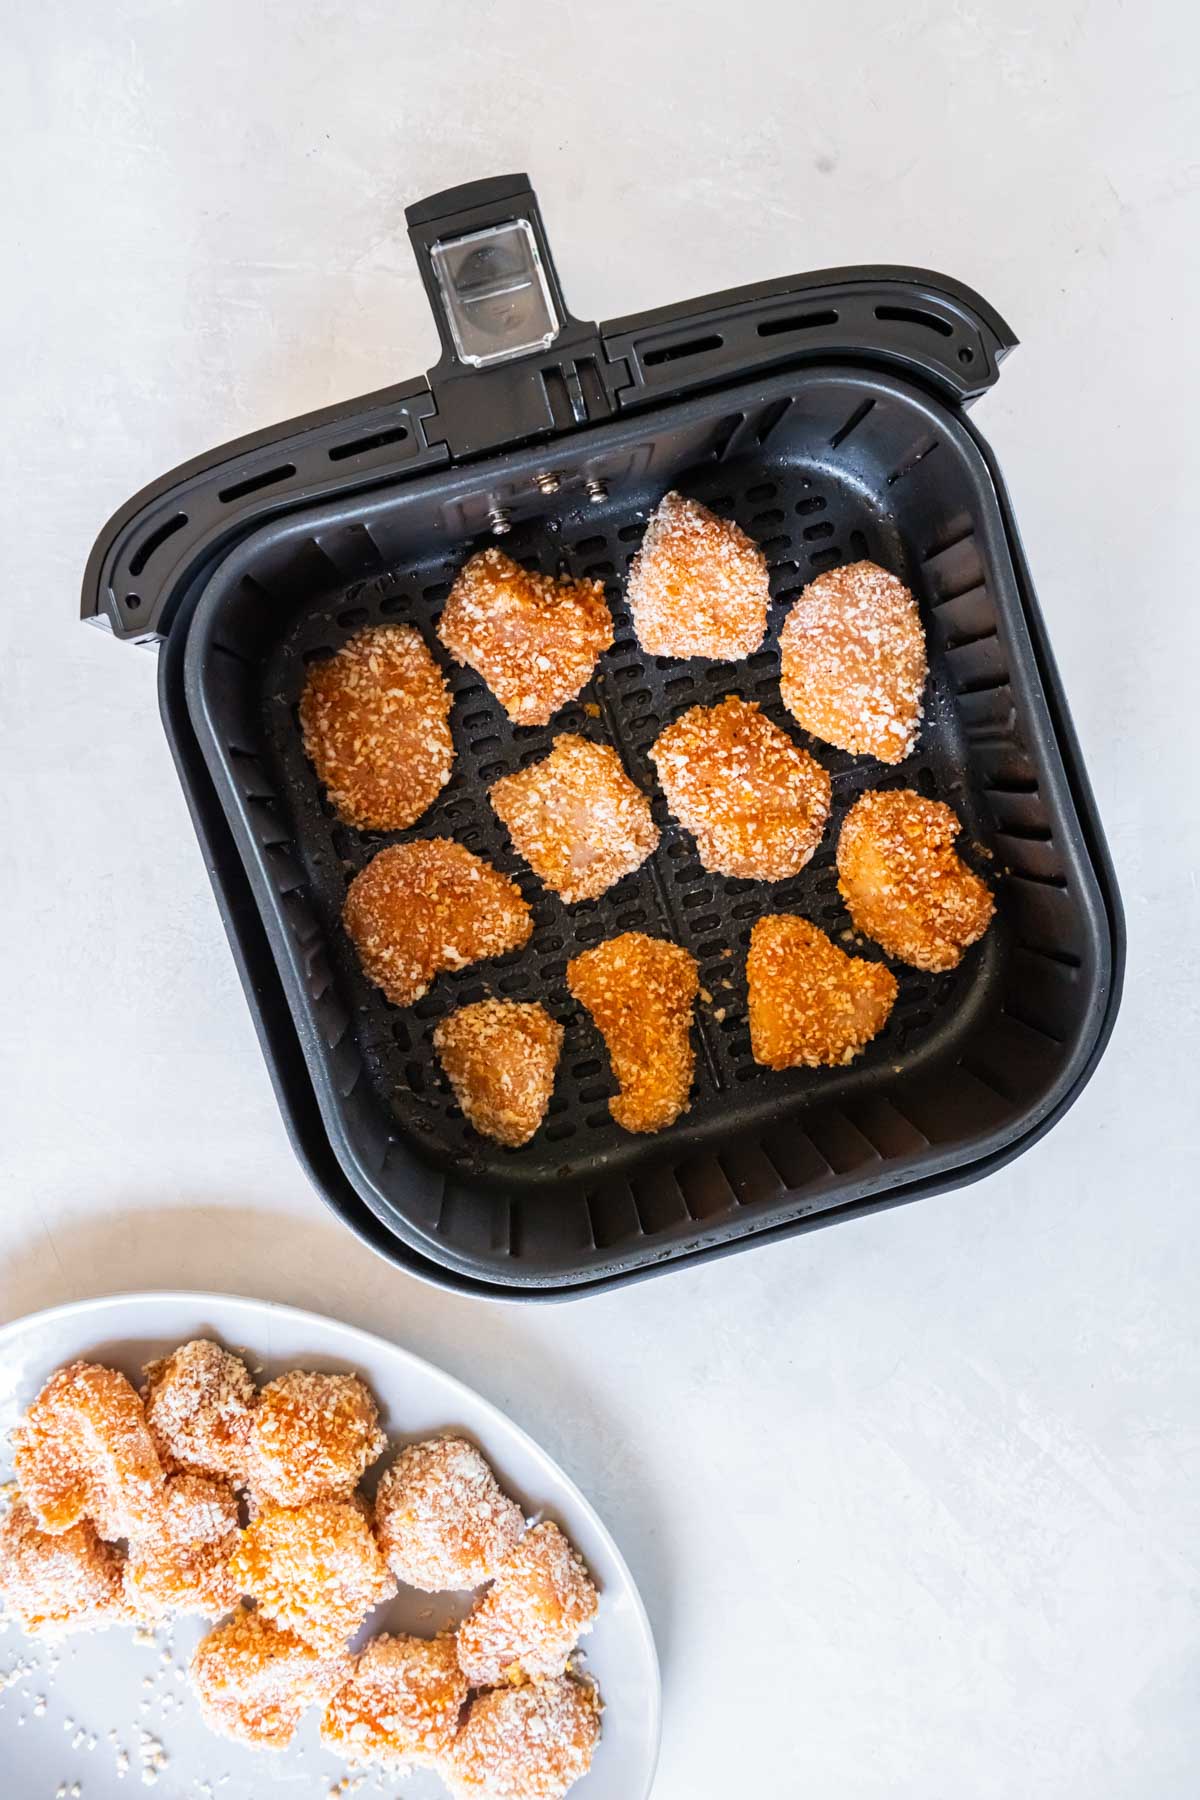 Uncooked chicken nuggets added to air fryer basket in a single layer.